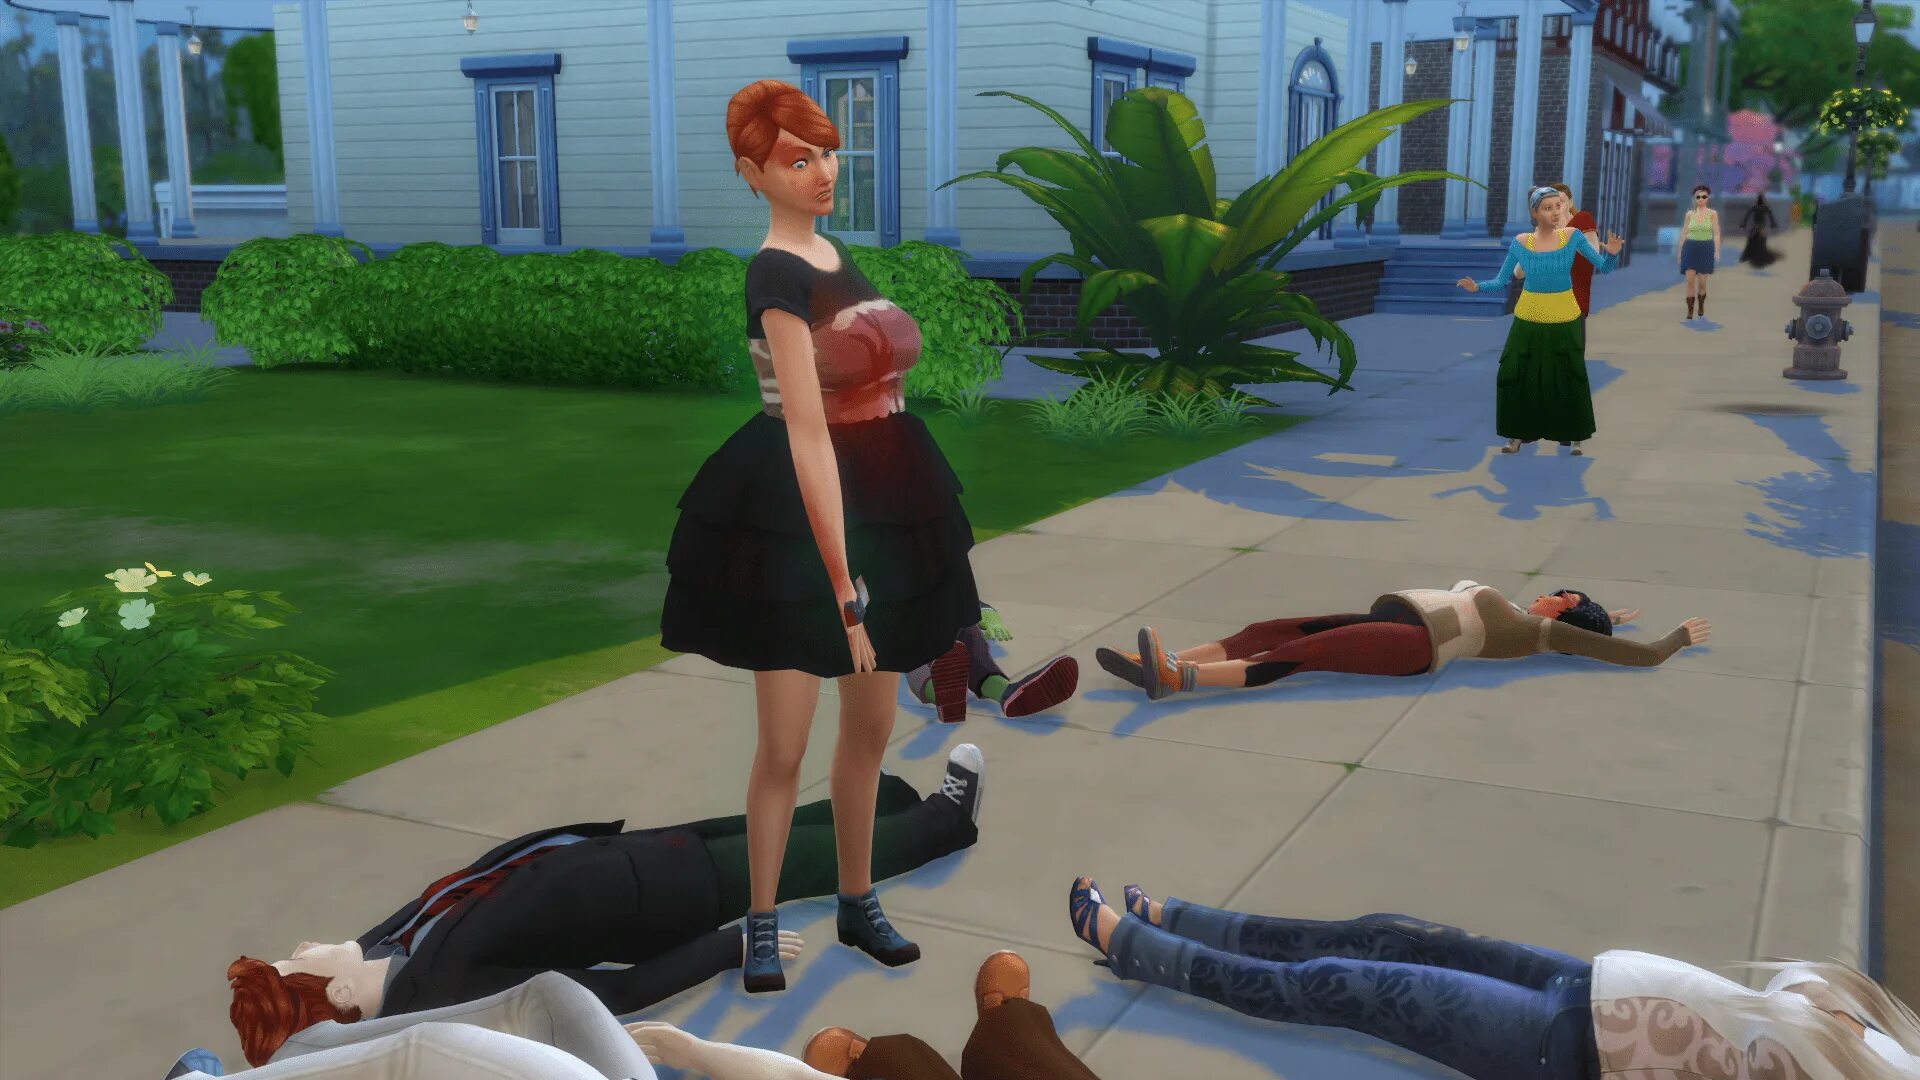 SIMS 4 Murder. The SIMS 5 мода. SIMS 4 violence мод. Whickedwhims анимации